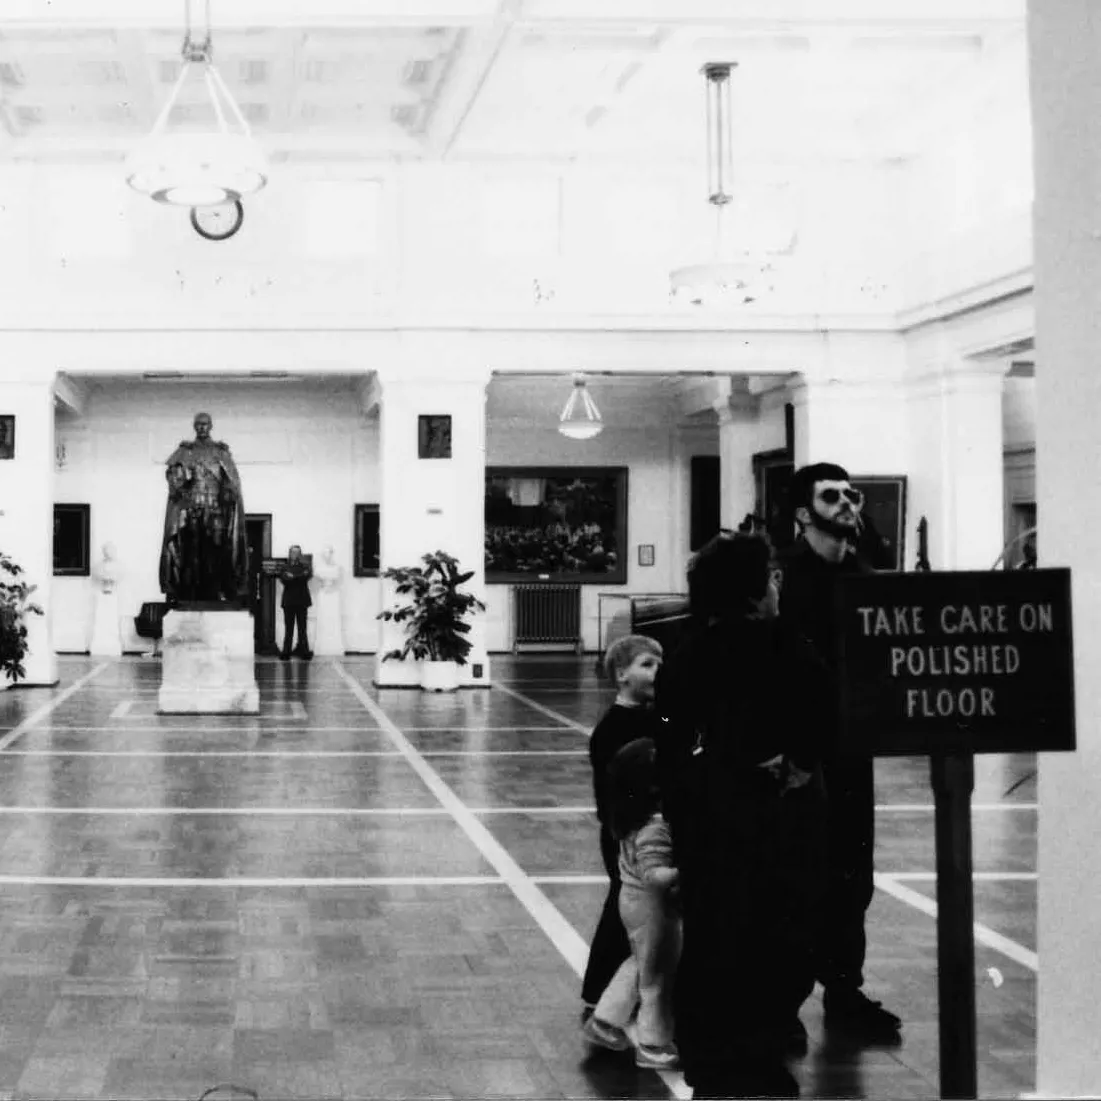 This black and white photograph of King’s Hall looks along the length of the room to the slightly larger than life bronze statue of King George the Fifth on a marble pedestal. King’s Hall is a large white room with a vaulted ceiling, celerestory windows, colonnades and a polished parquet floor.  The walls and columns feature artworks and portraits. You can see people wandering through the space including a family with young children and an older lady. In the foreground are two signs.